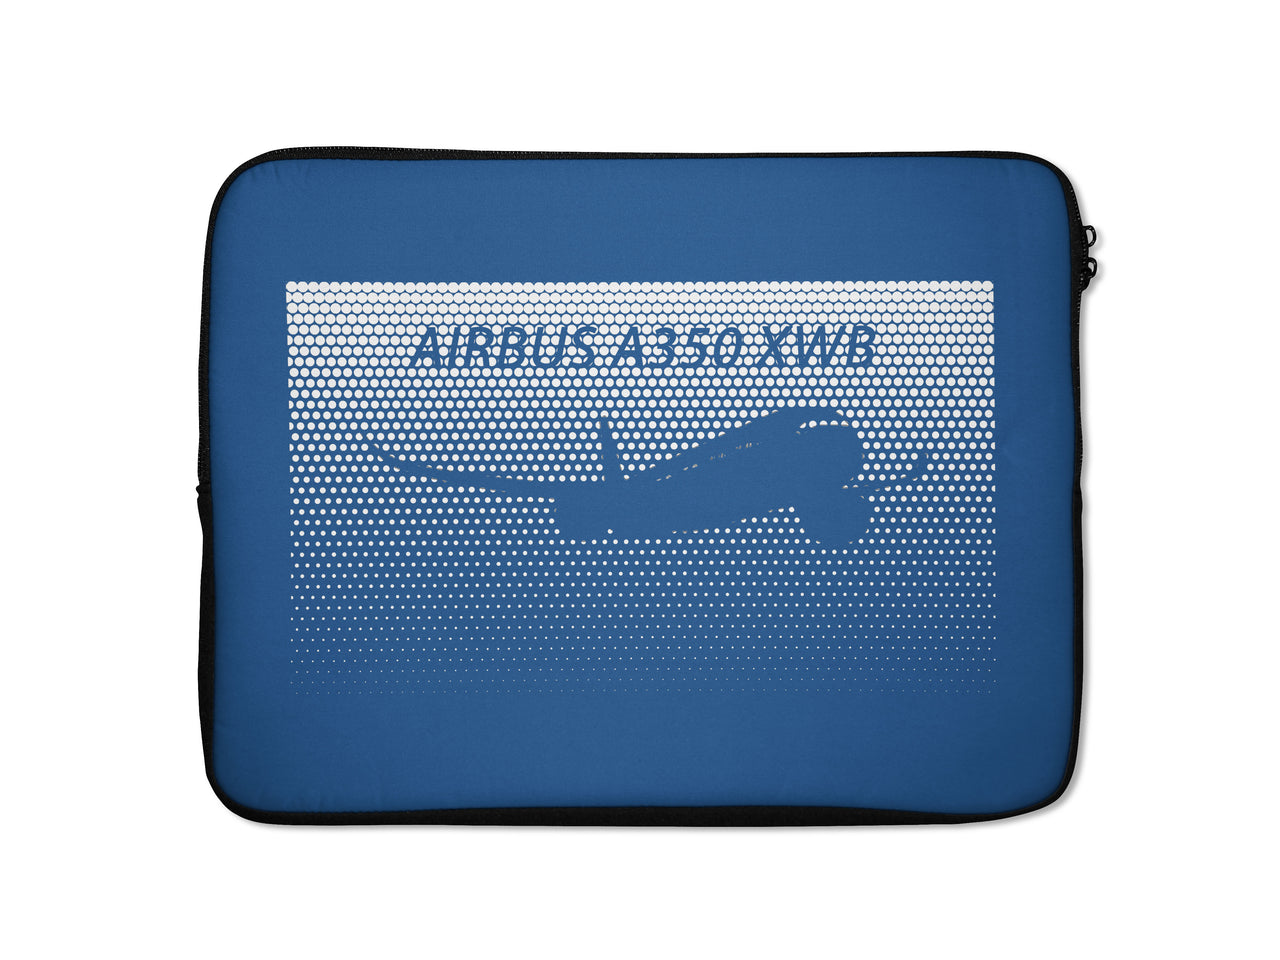 Airbus A350XWB & Dots Designed Laptop & Tablet Cases